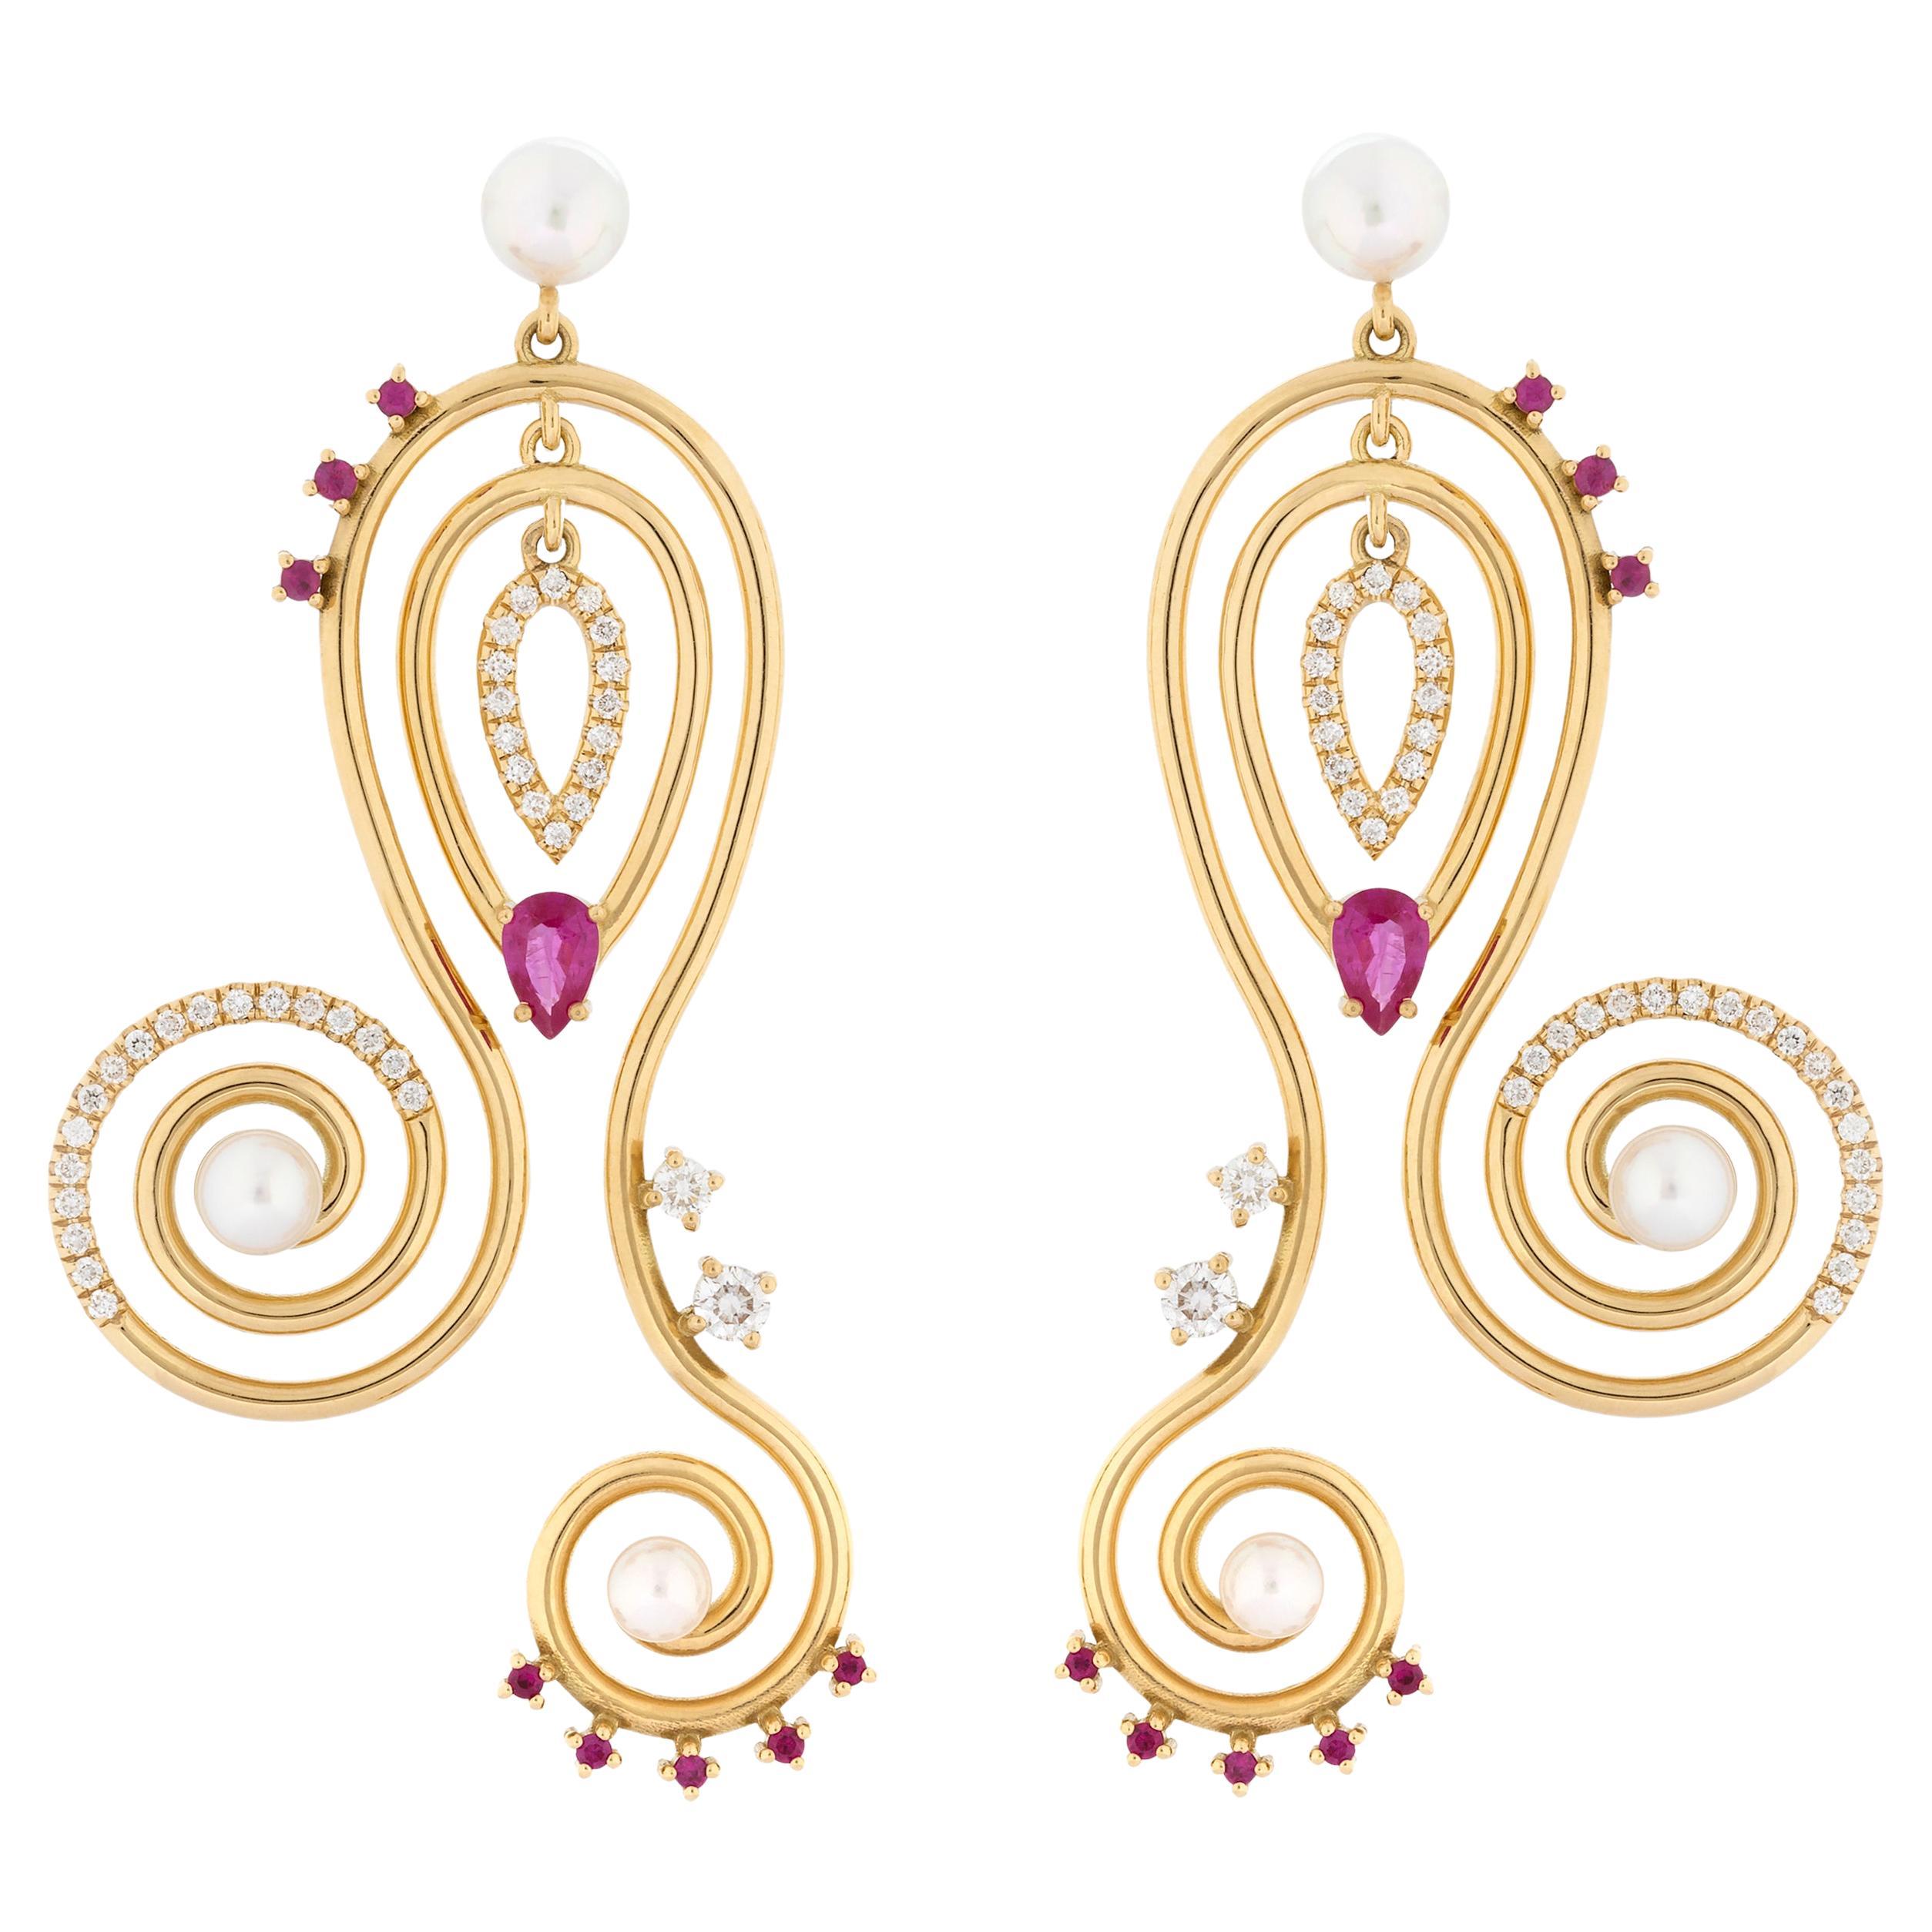 Serenity Earrings in 18 Karat Yellow Gold with Diamonds, Rubies And Pearls